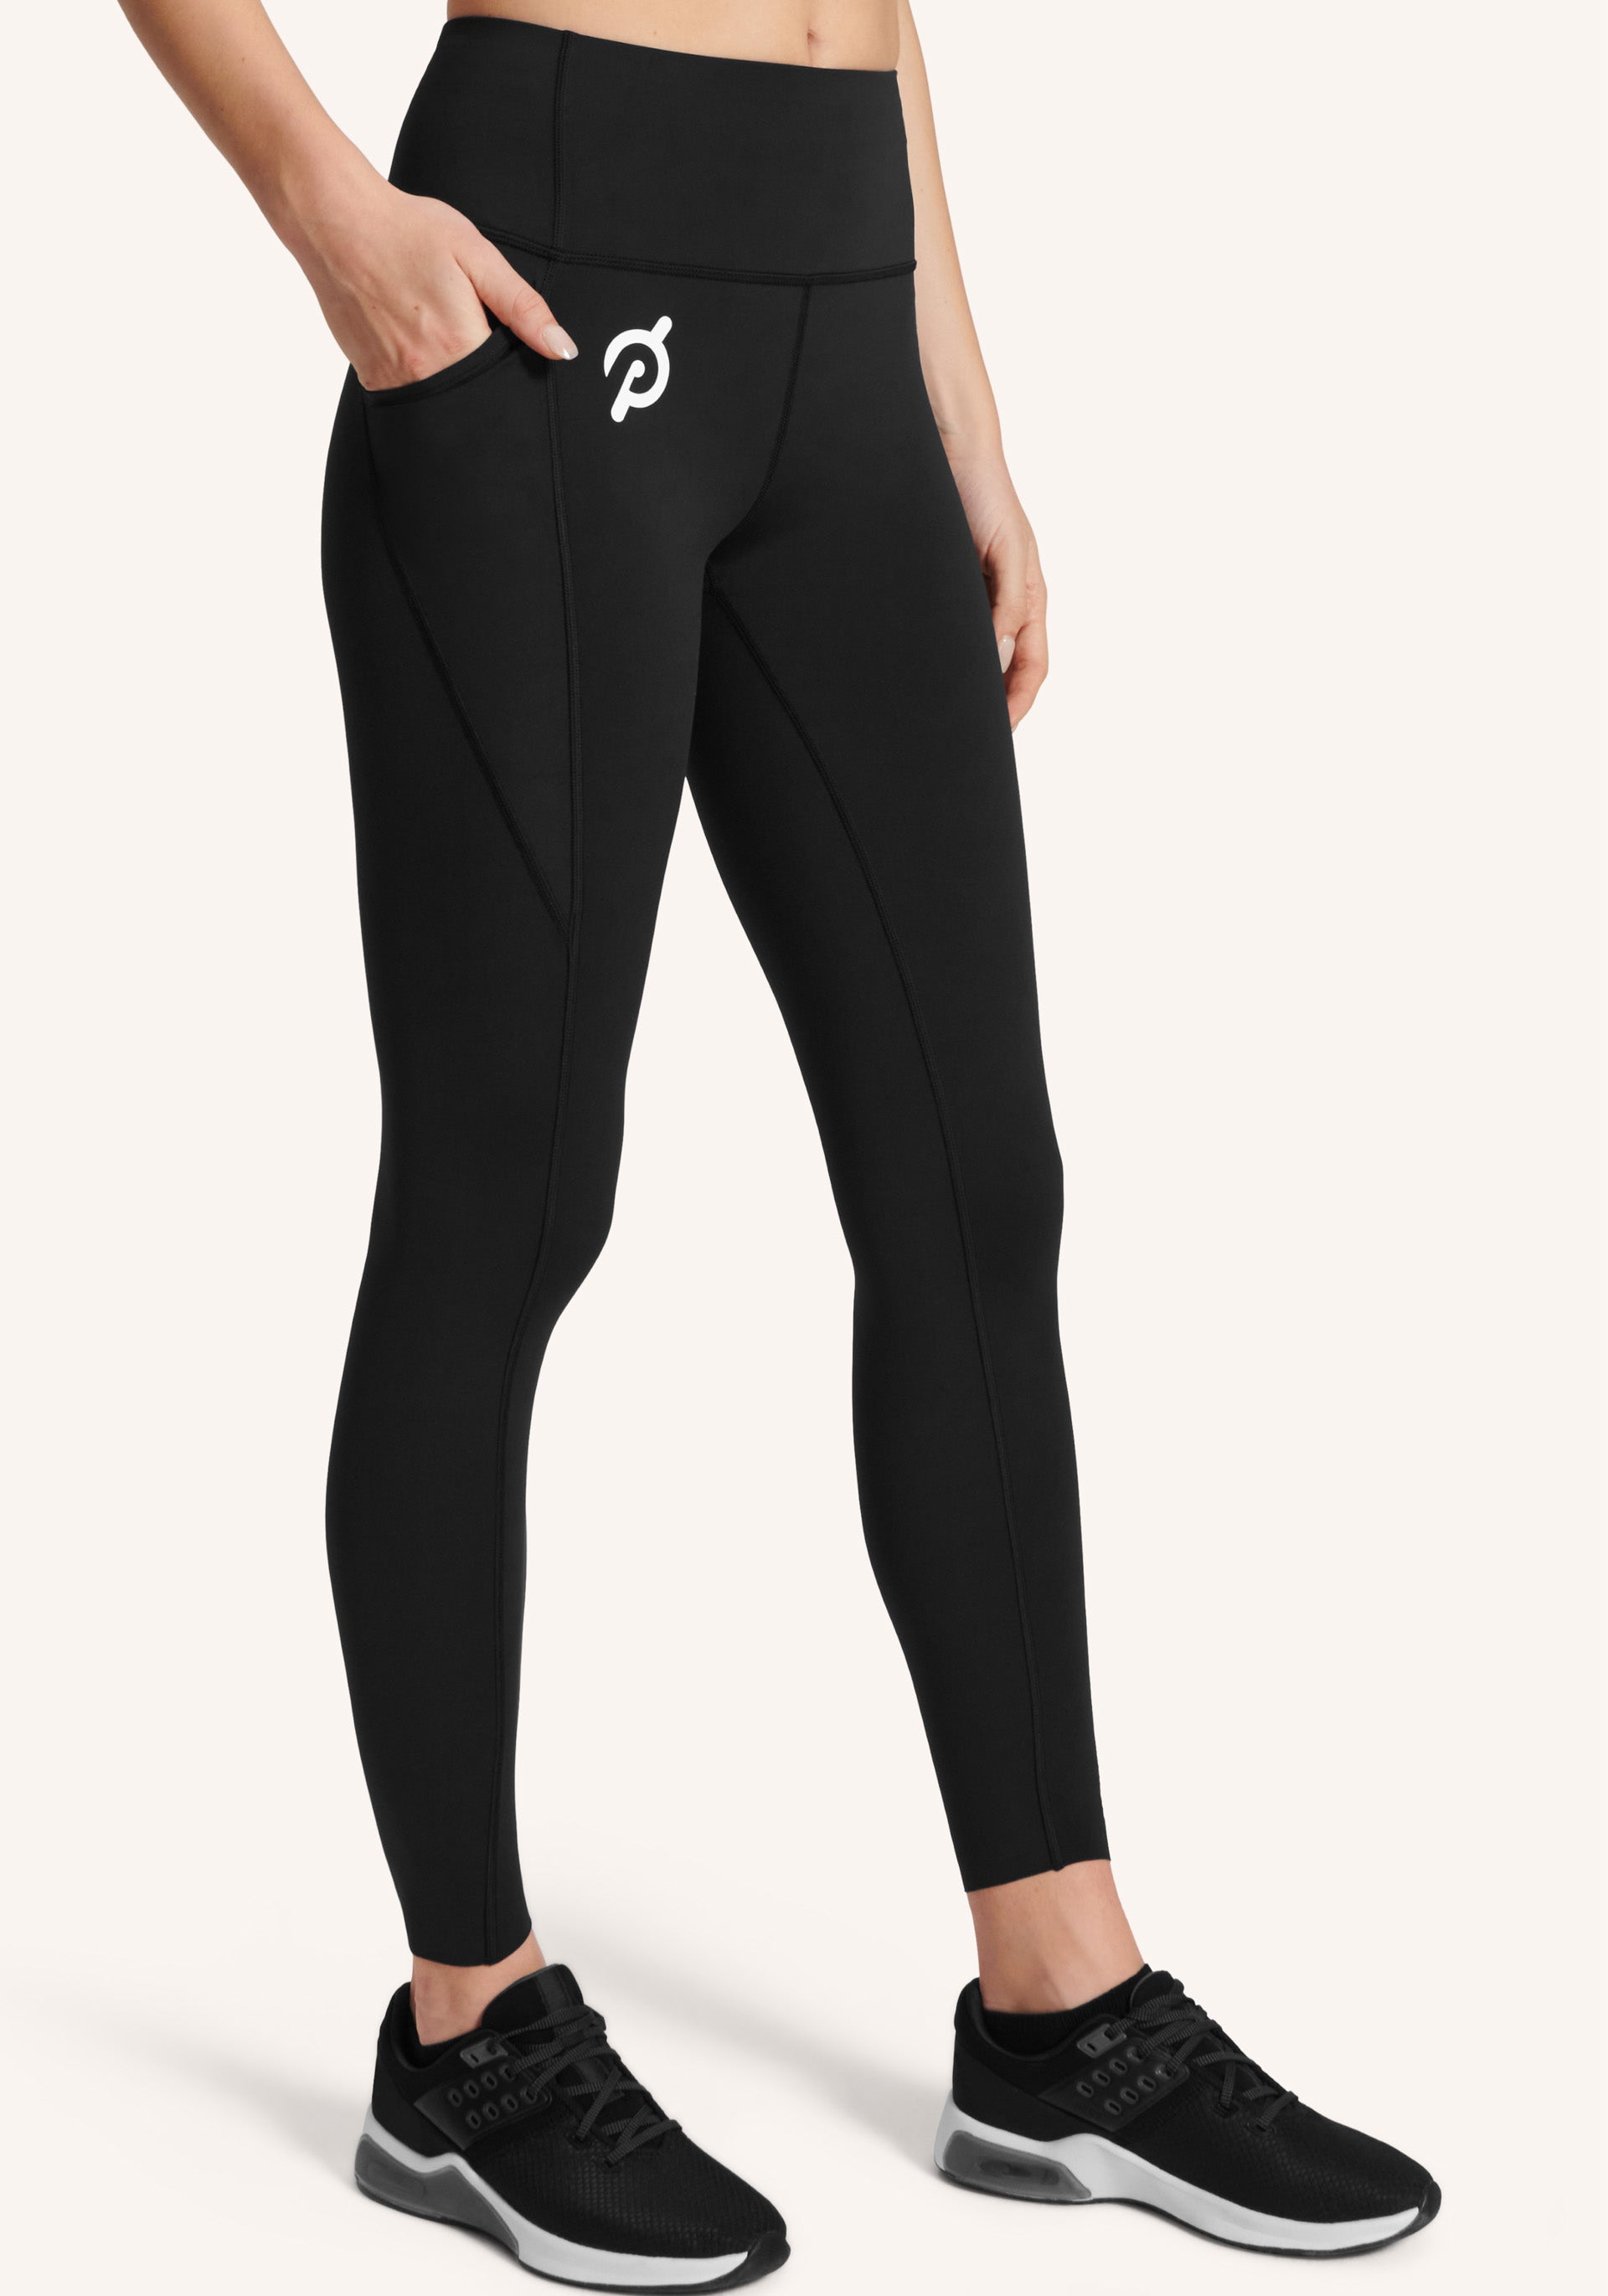 Peloton Apparel Women's Grey Slit Leggings, Size Small Brand New Without  Tags : r/gym_apparel_for_women